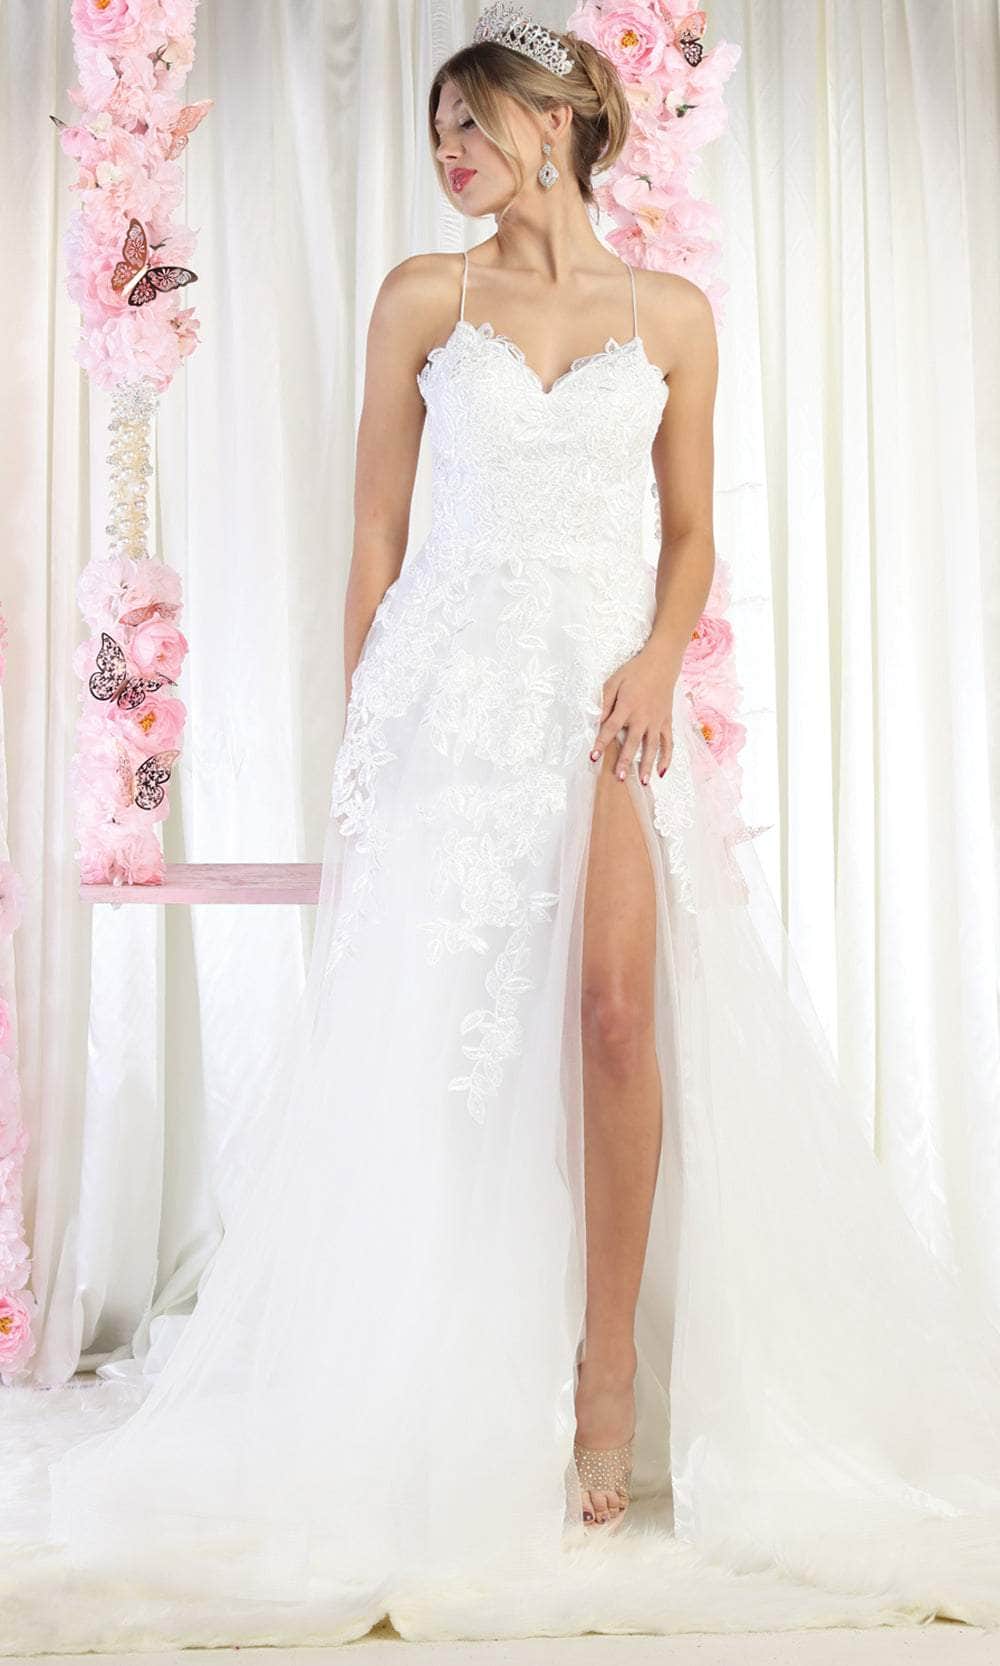 Image of May Queen RQ7967 - Embroidered High Slit Bridal Gown